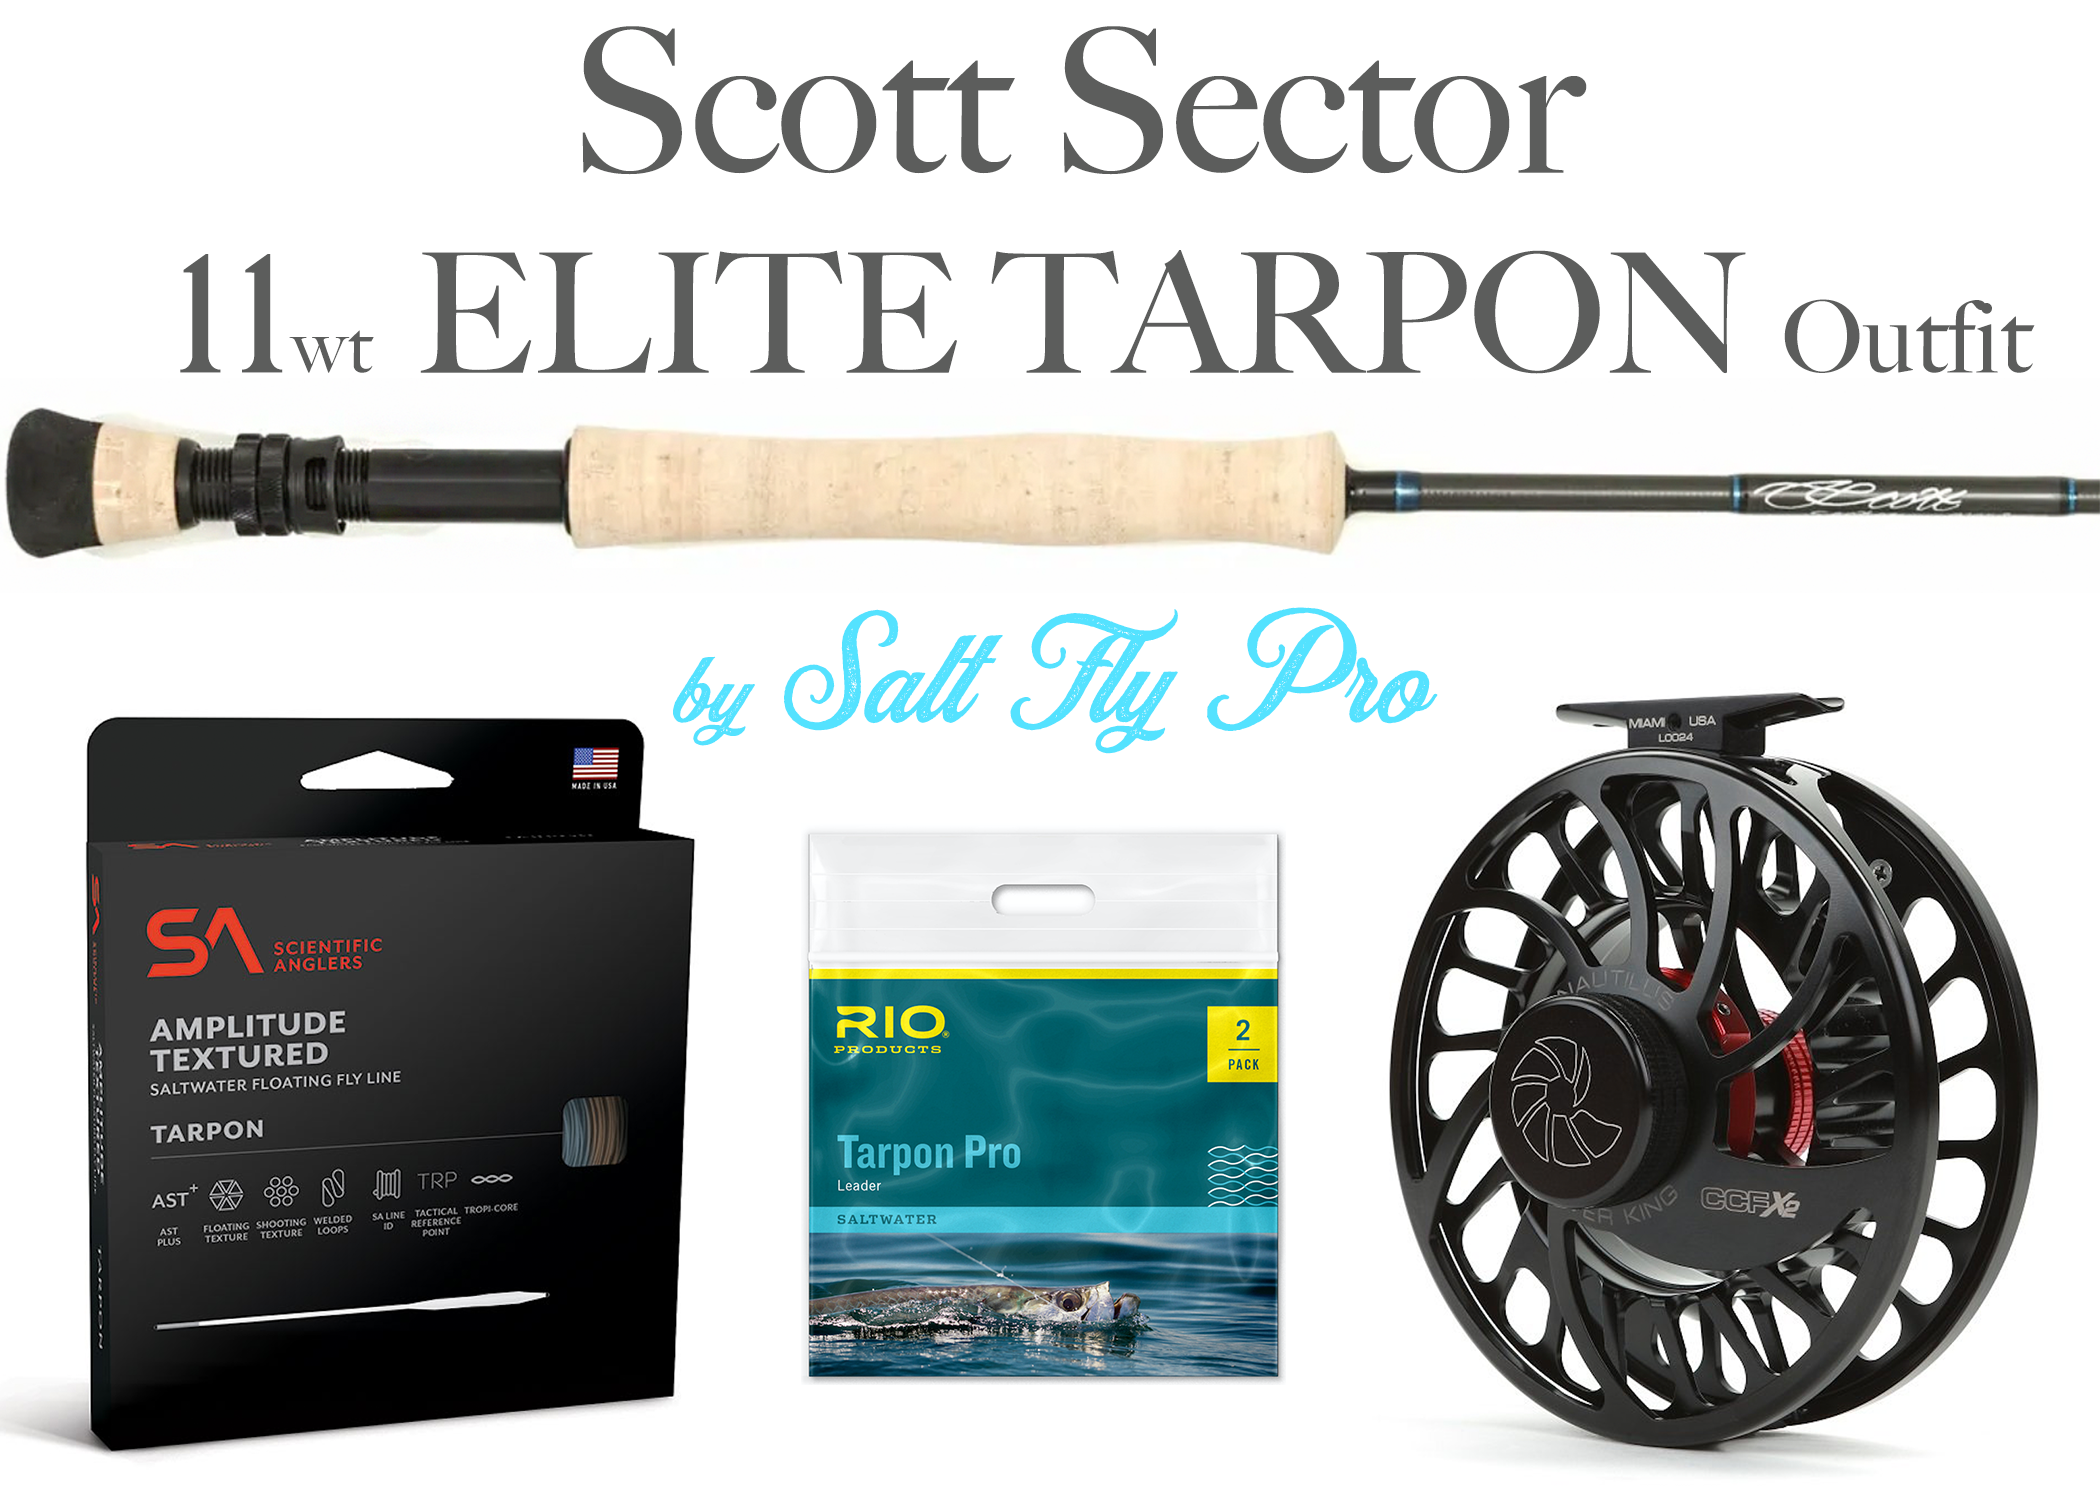 Scott Sector 11wt ELITE TARPON Outfit Combo with Nautilus Silver King